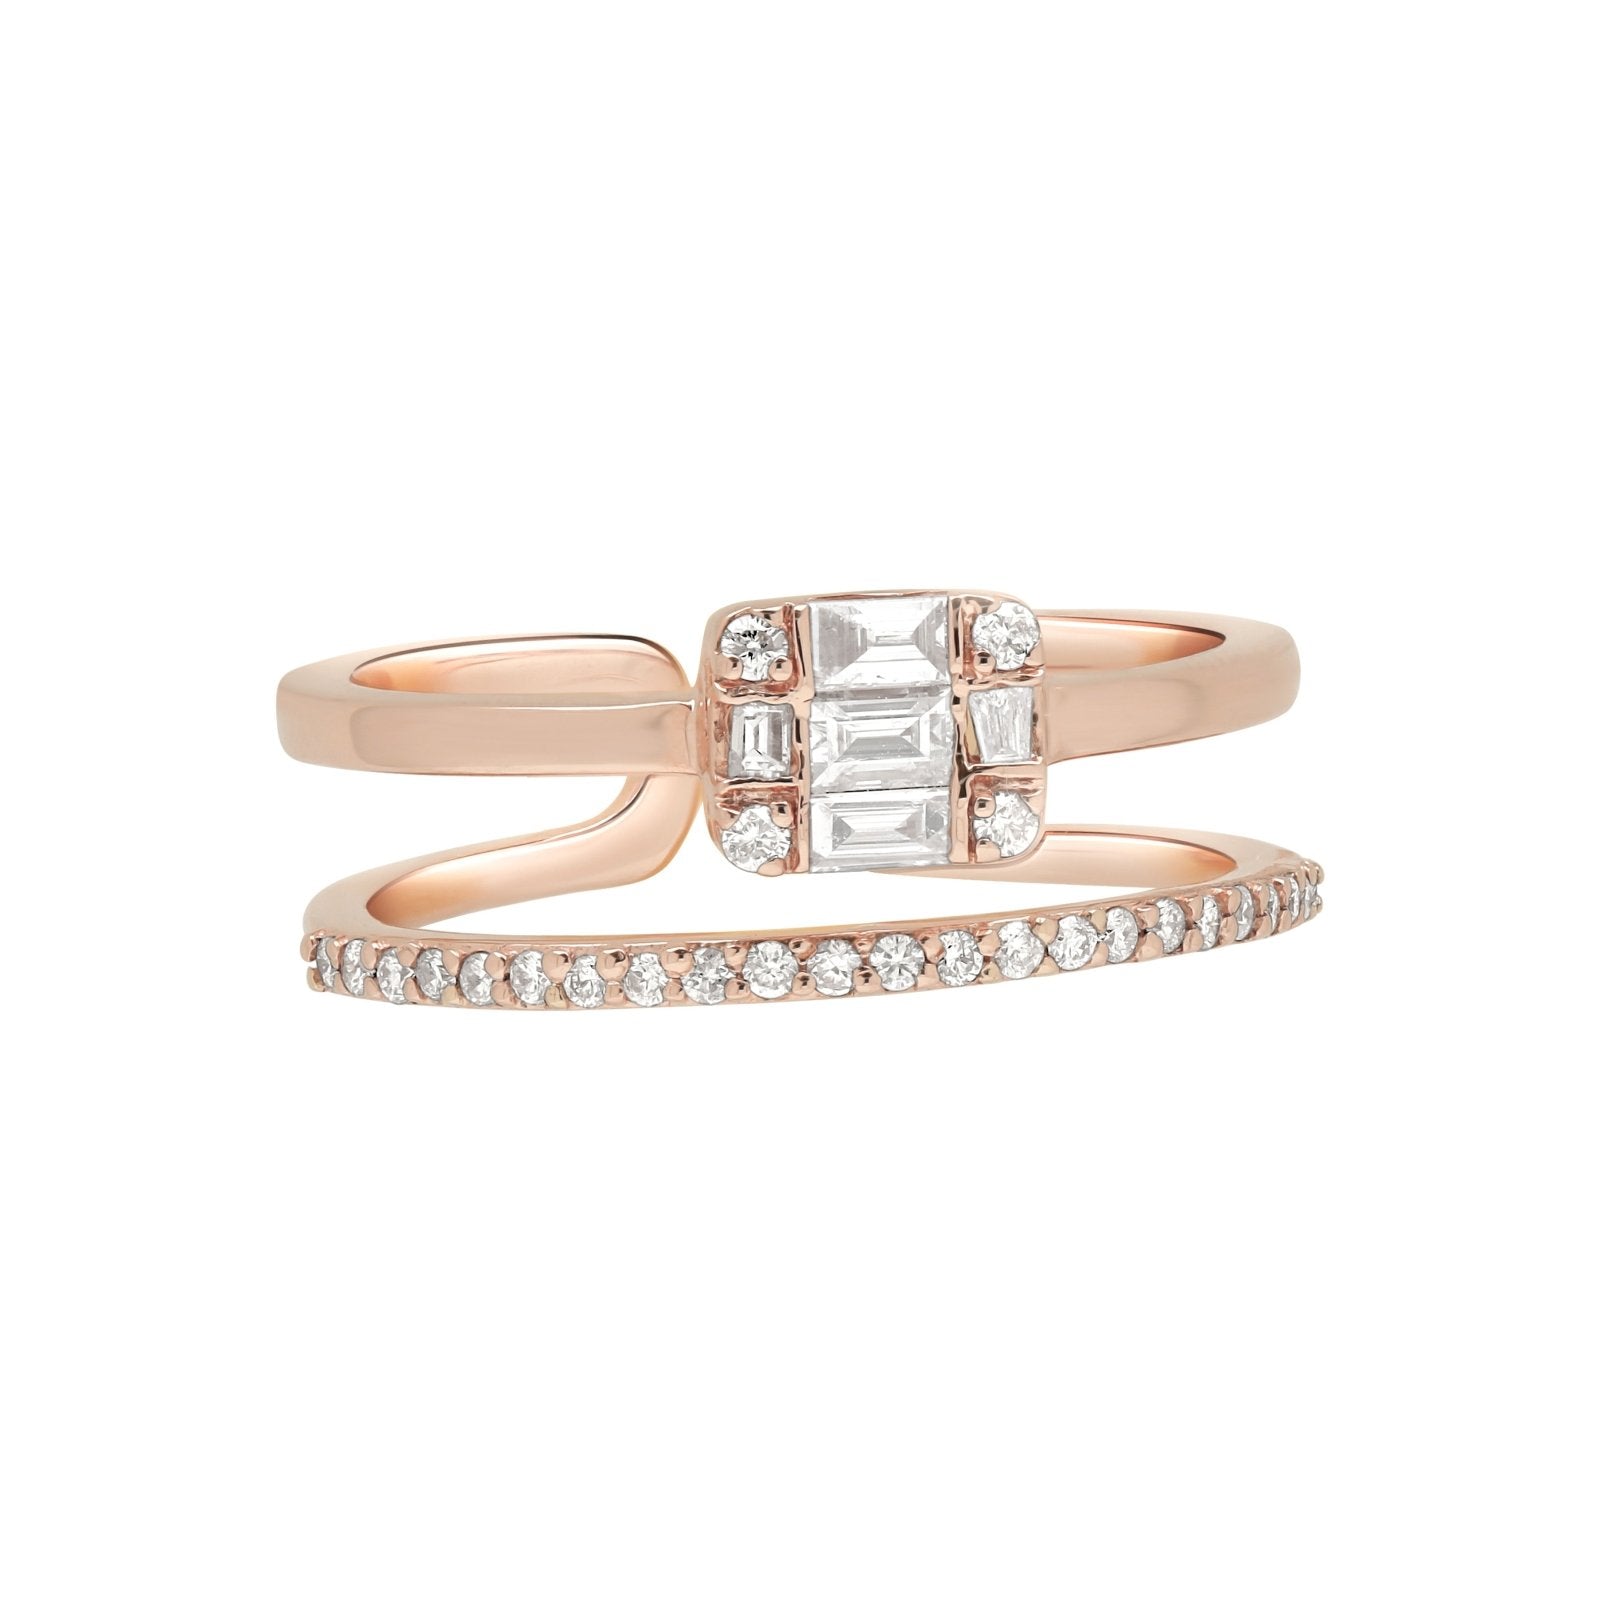 Eternity Band and Diamond Baguette Illusion Double Ring Rings Estella Collection 17495 14k Diamond Engagement Ring #tag4# #tag5# #tag6# #tag7# #tag8# #tag9# #tag10# 6 14K Rose Gold